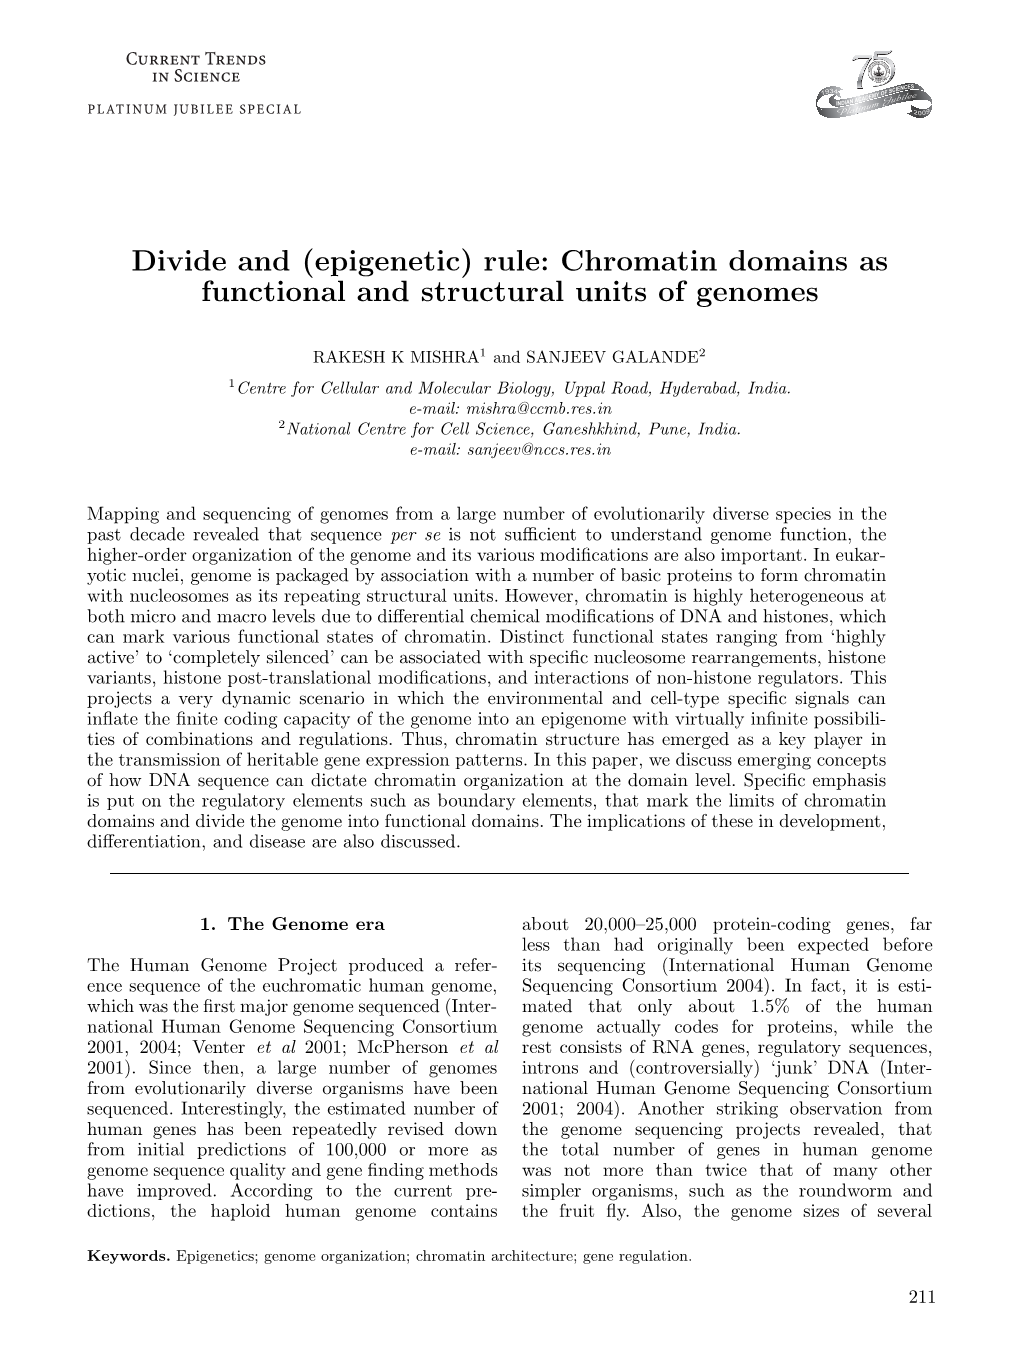 Divide and (Epigenetic) Rule: Chromatin Domains As Functional and Structural Units of Genomes